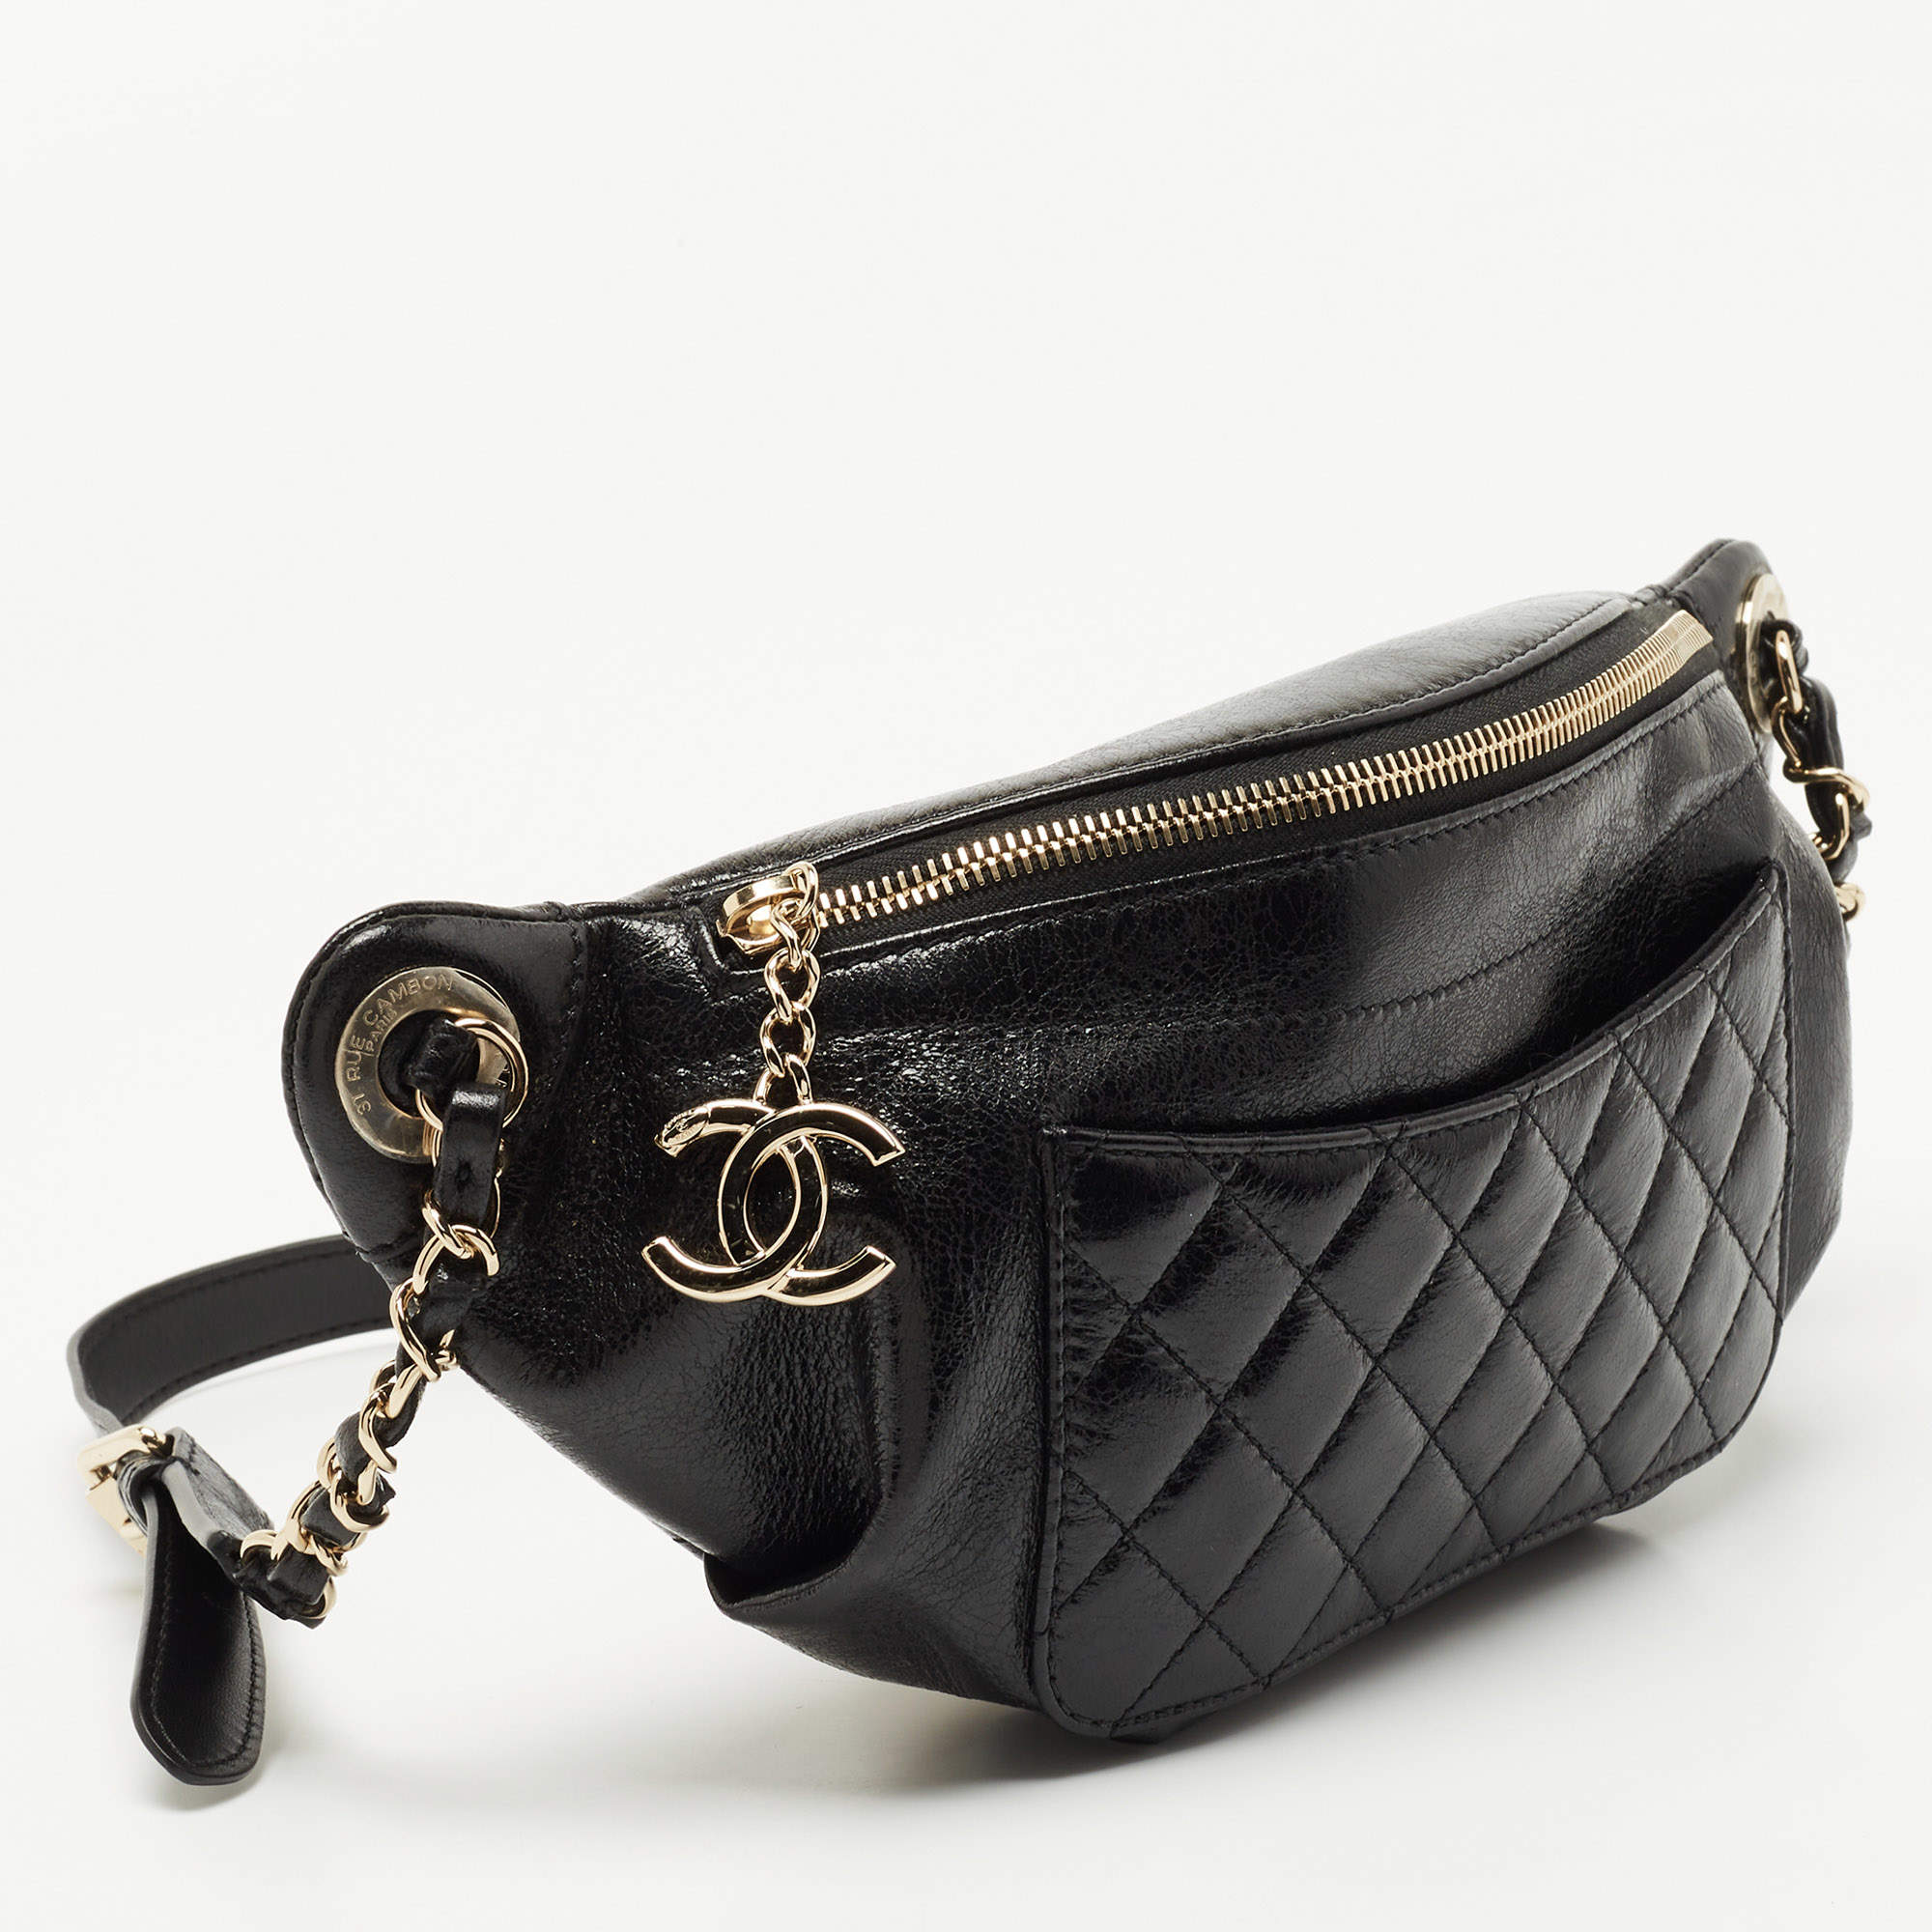 Chanel Black Quilted Glossy Leather Bi Classic Belt Bag